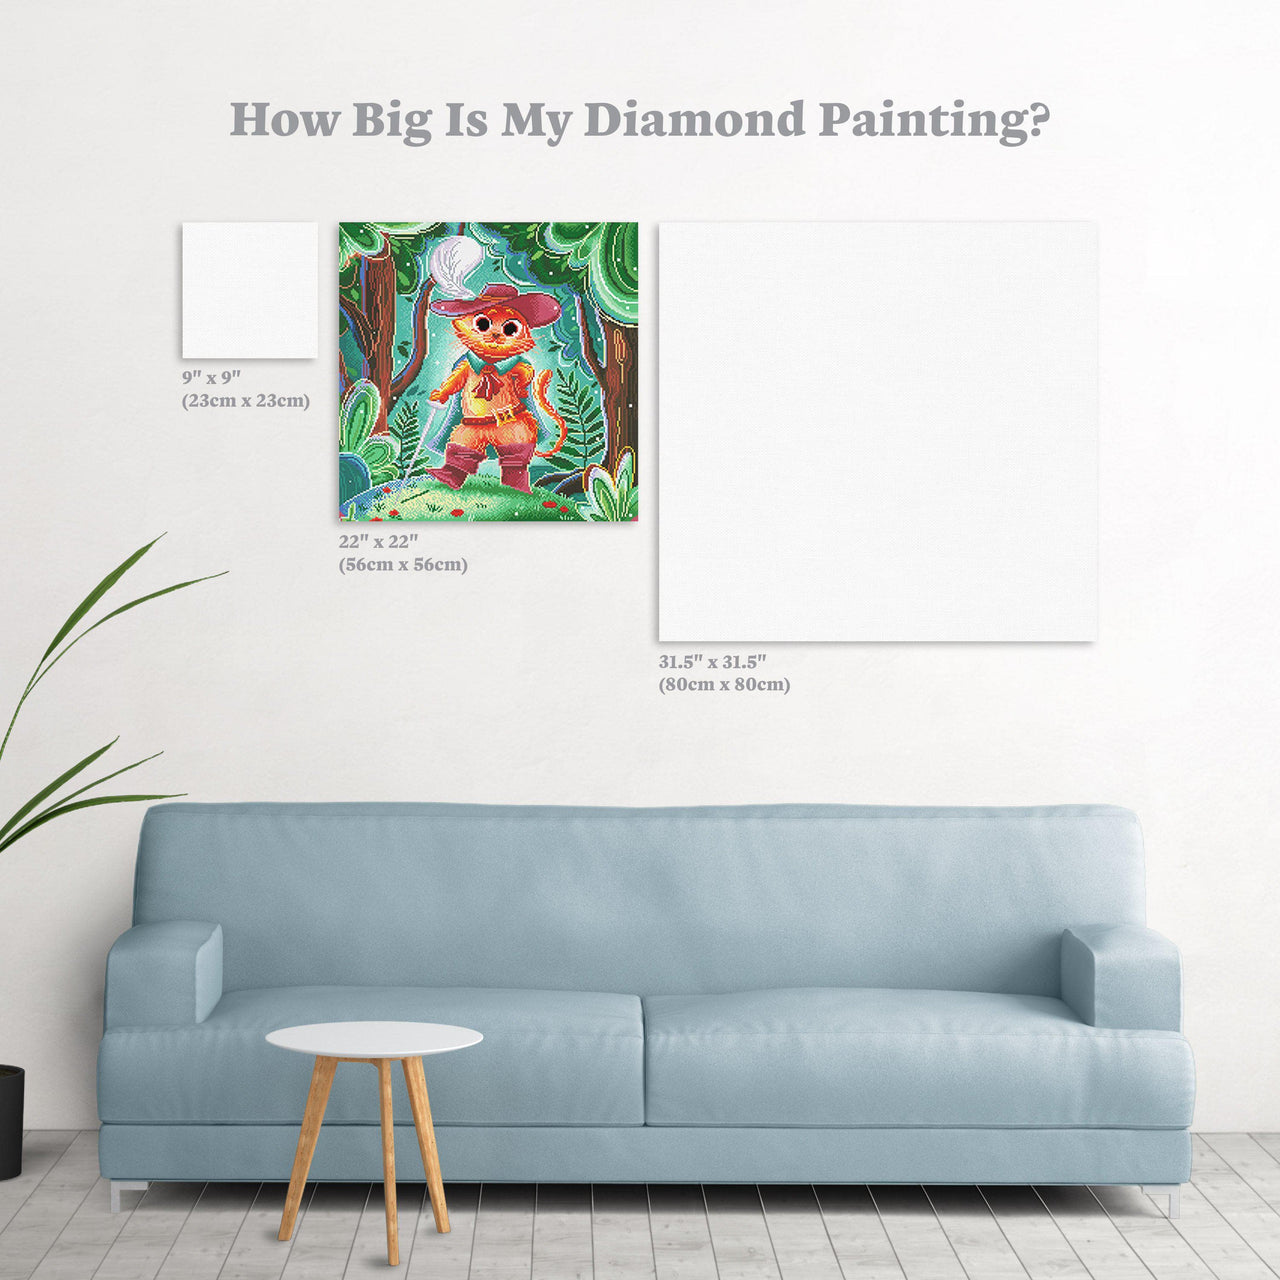 Diamond Painting Puss in Boots 22" x 22″ (56cm x 56cm) / Round with 48 Colors including 4 ABs / 39,601